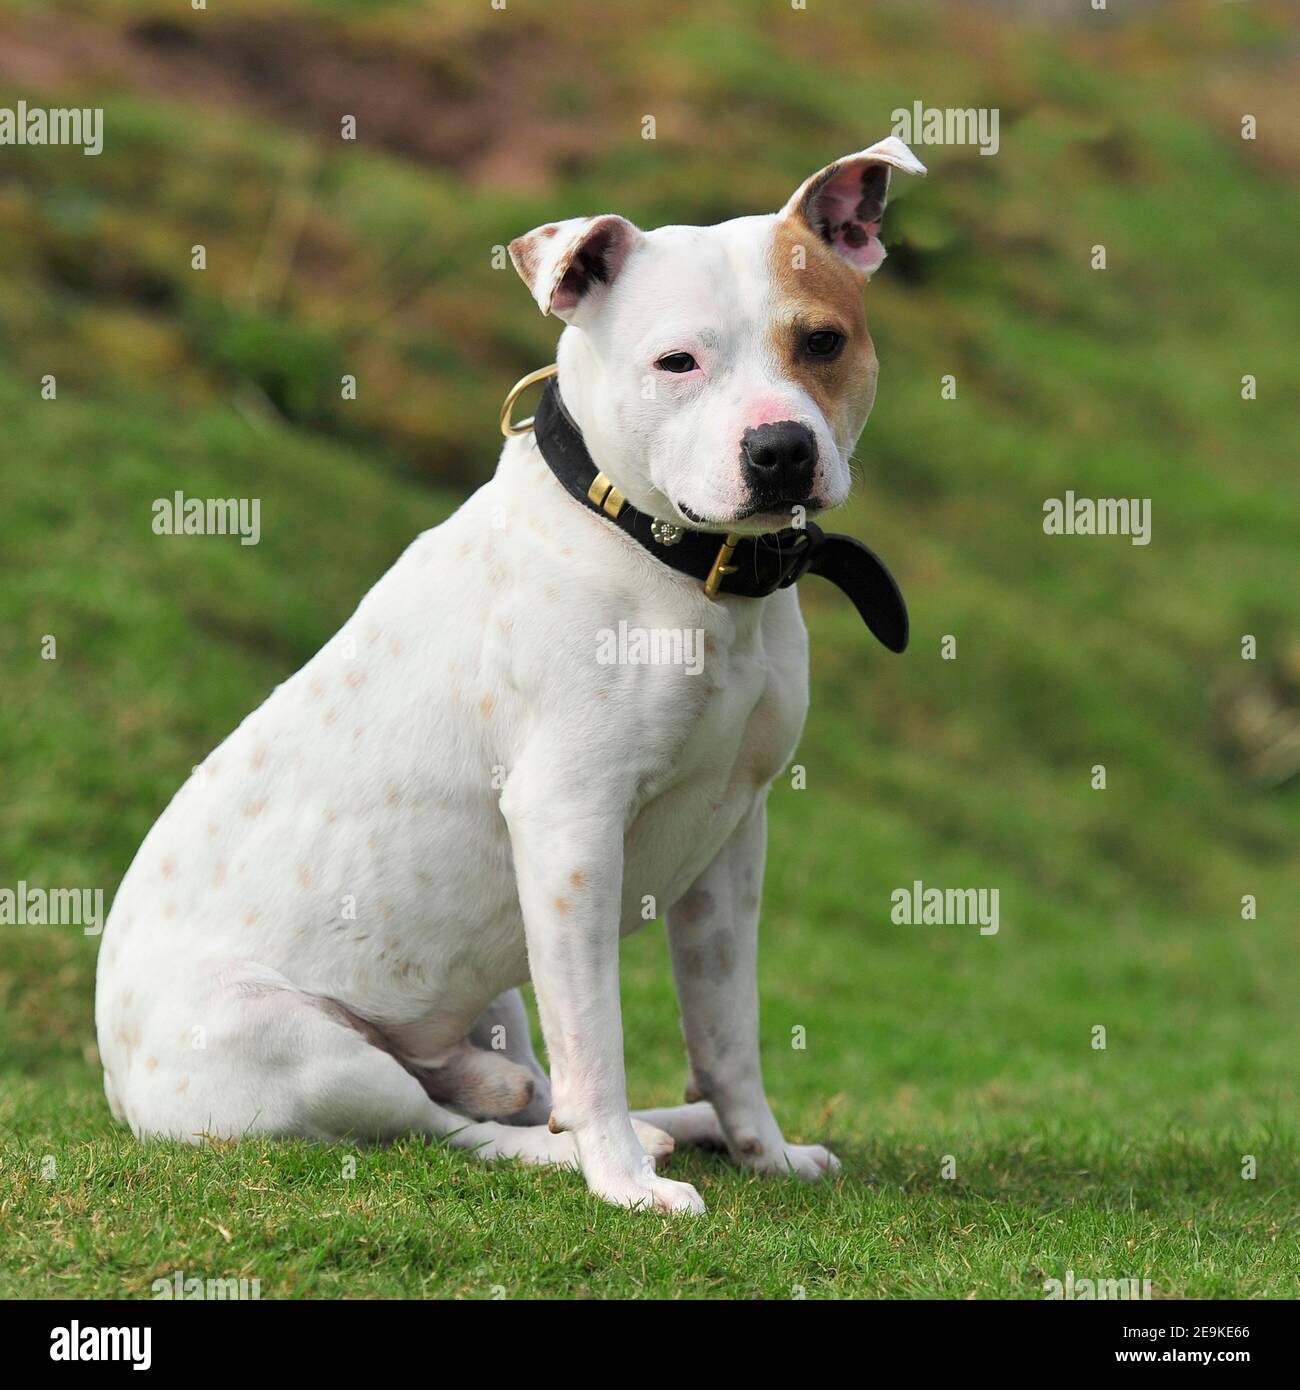 Staffordshire Bull Terrier dog Banque D'Images